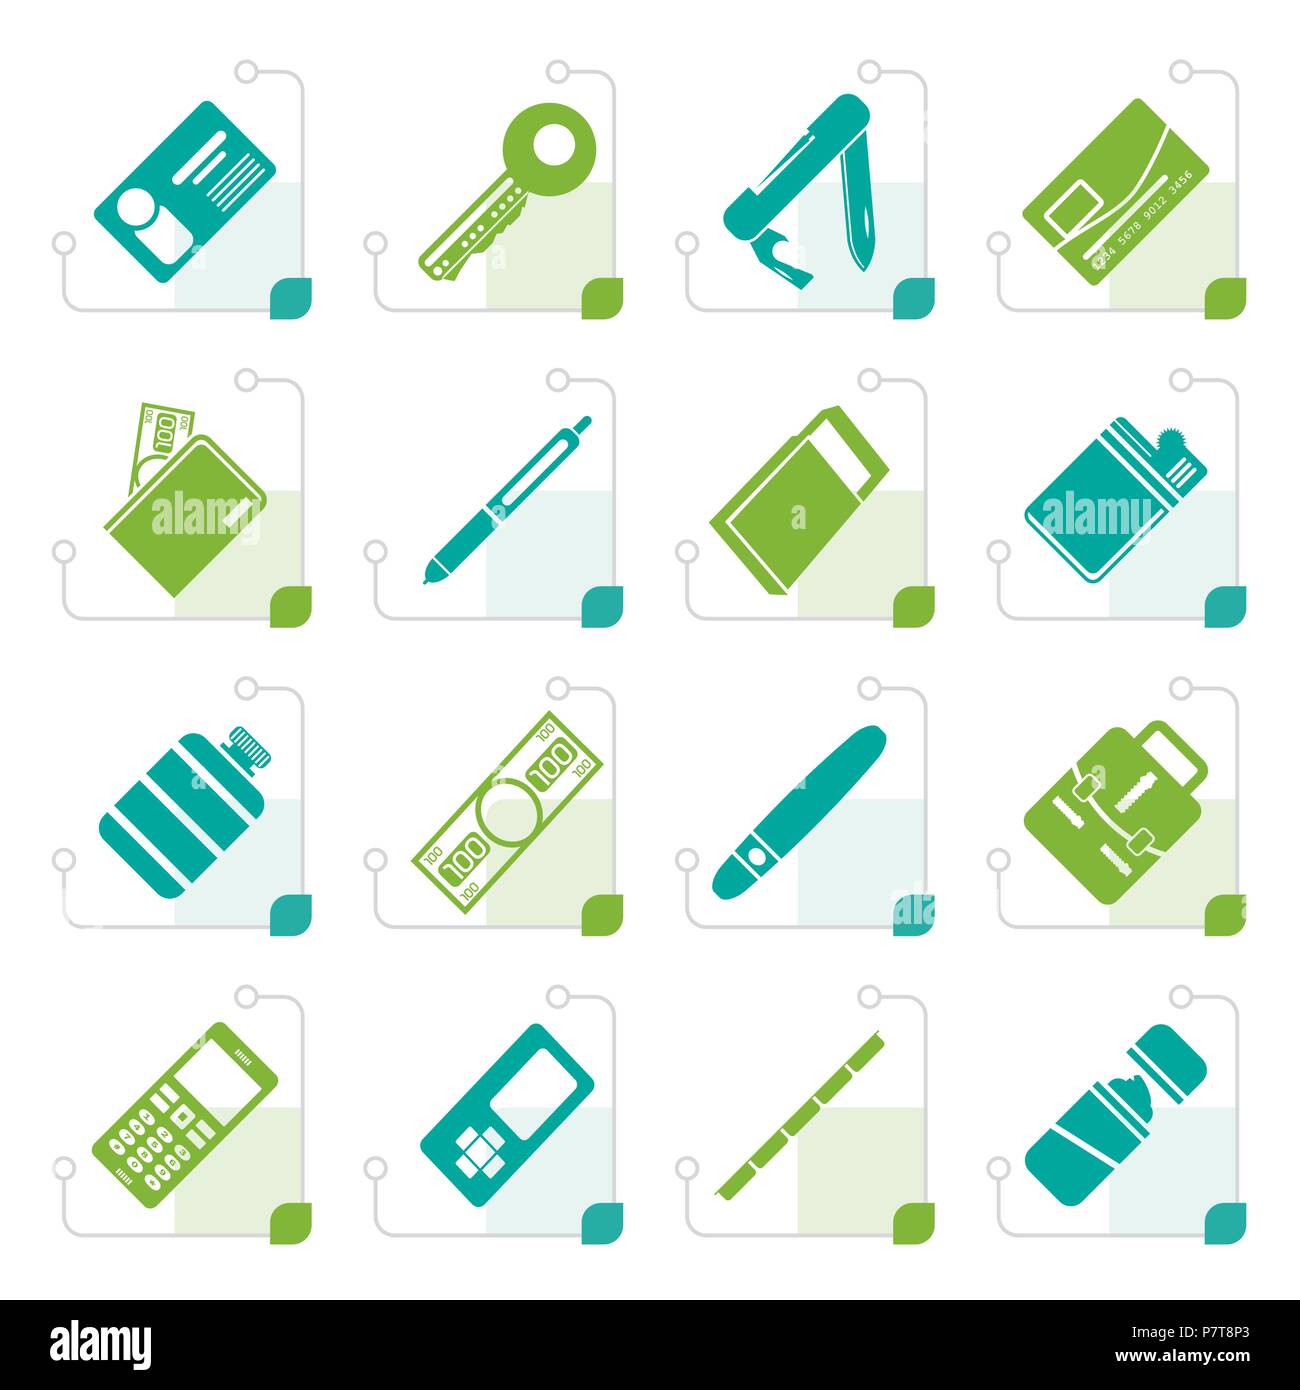 Stylized Simple Vector Object Icons - Vector Icon Set Stock Vector